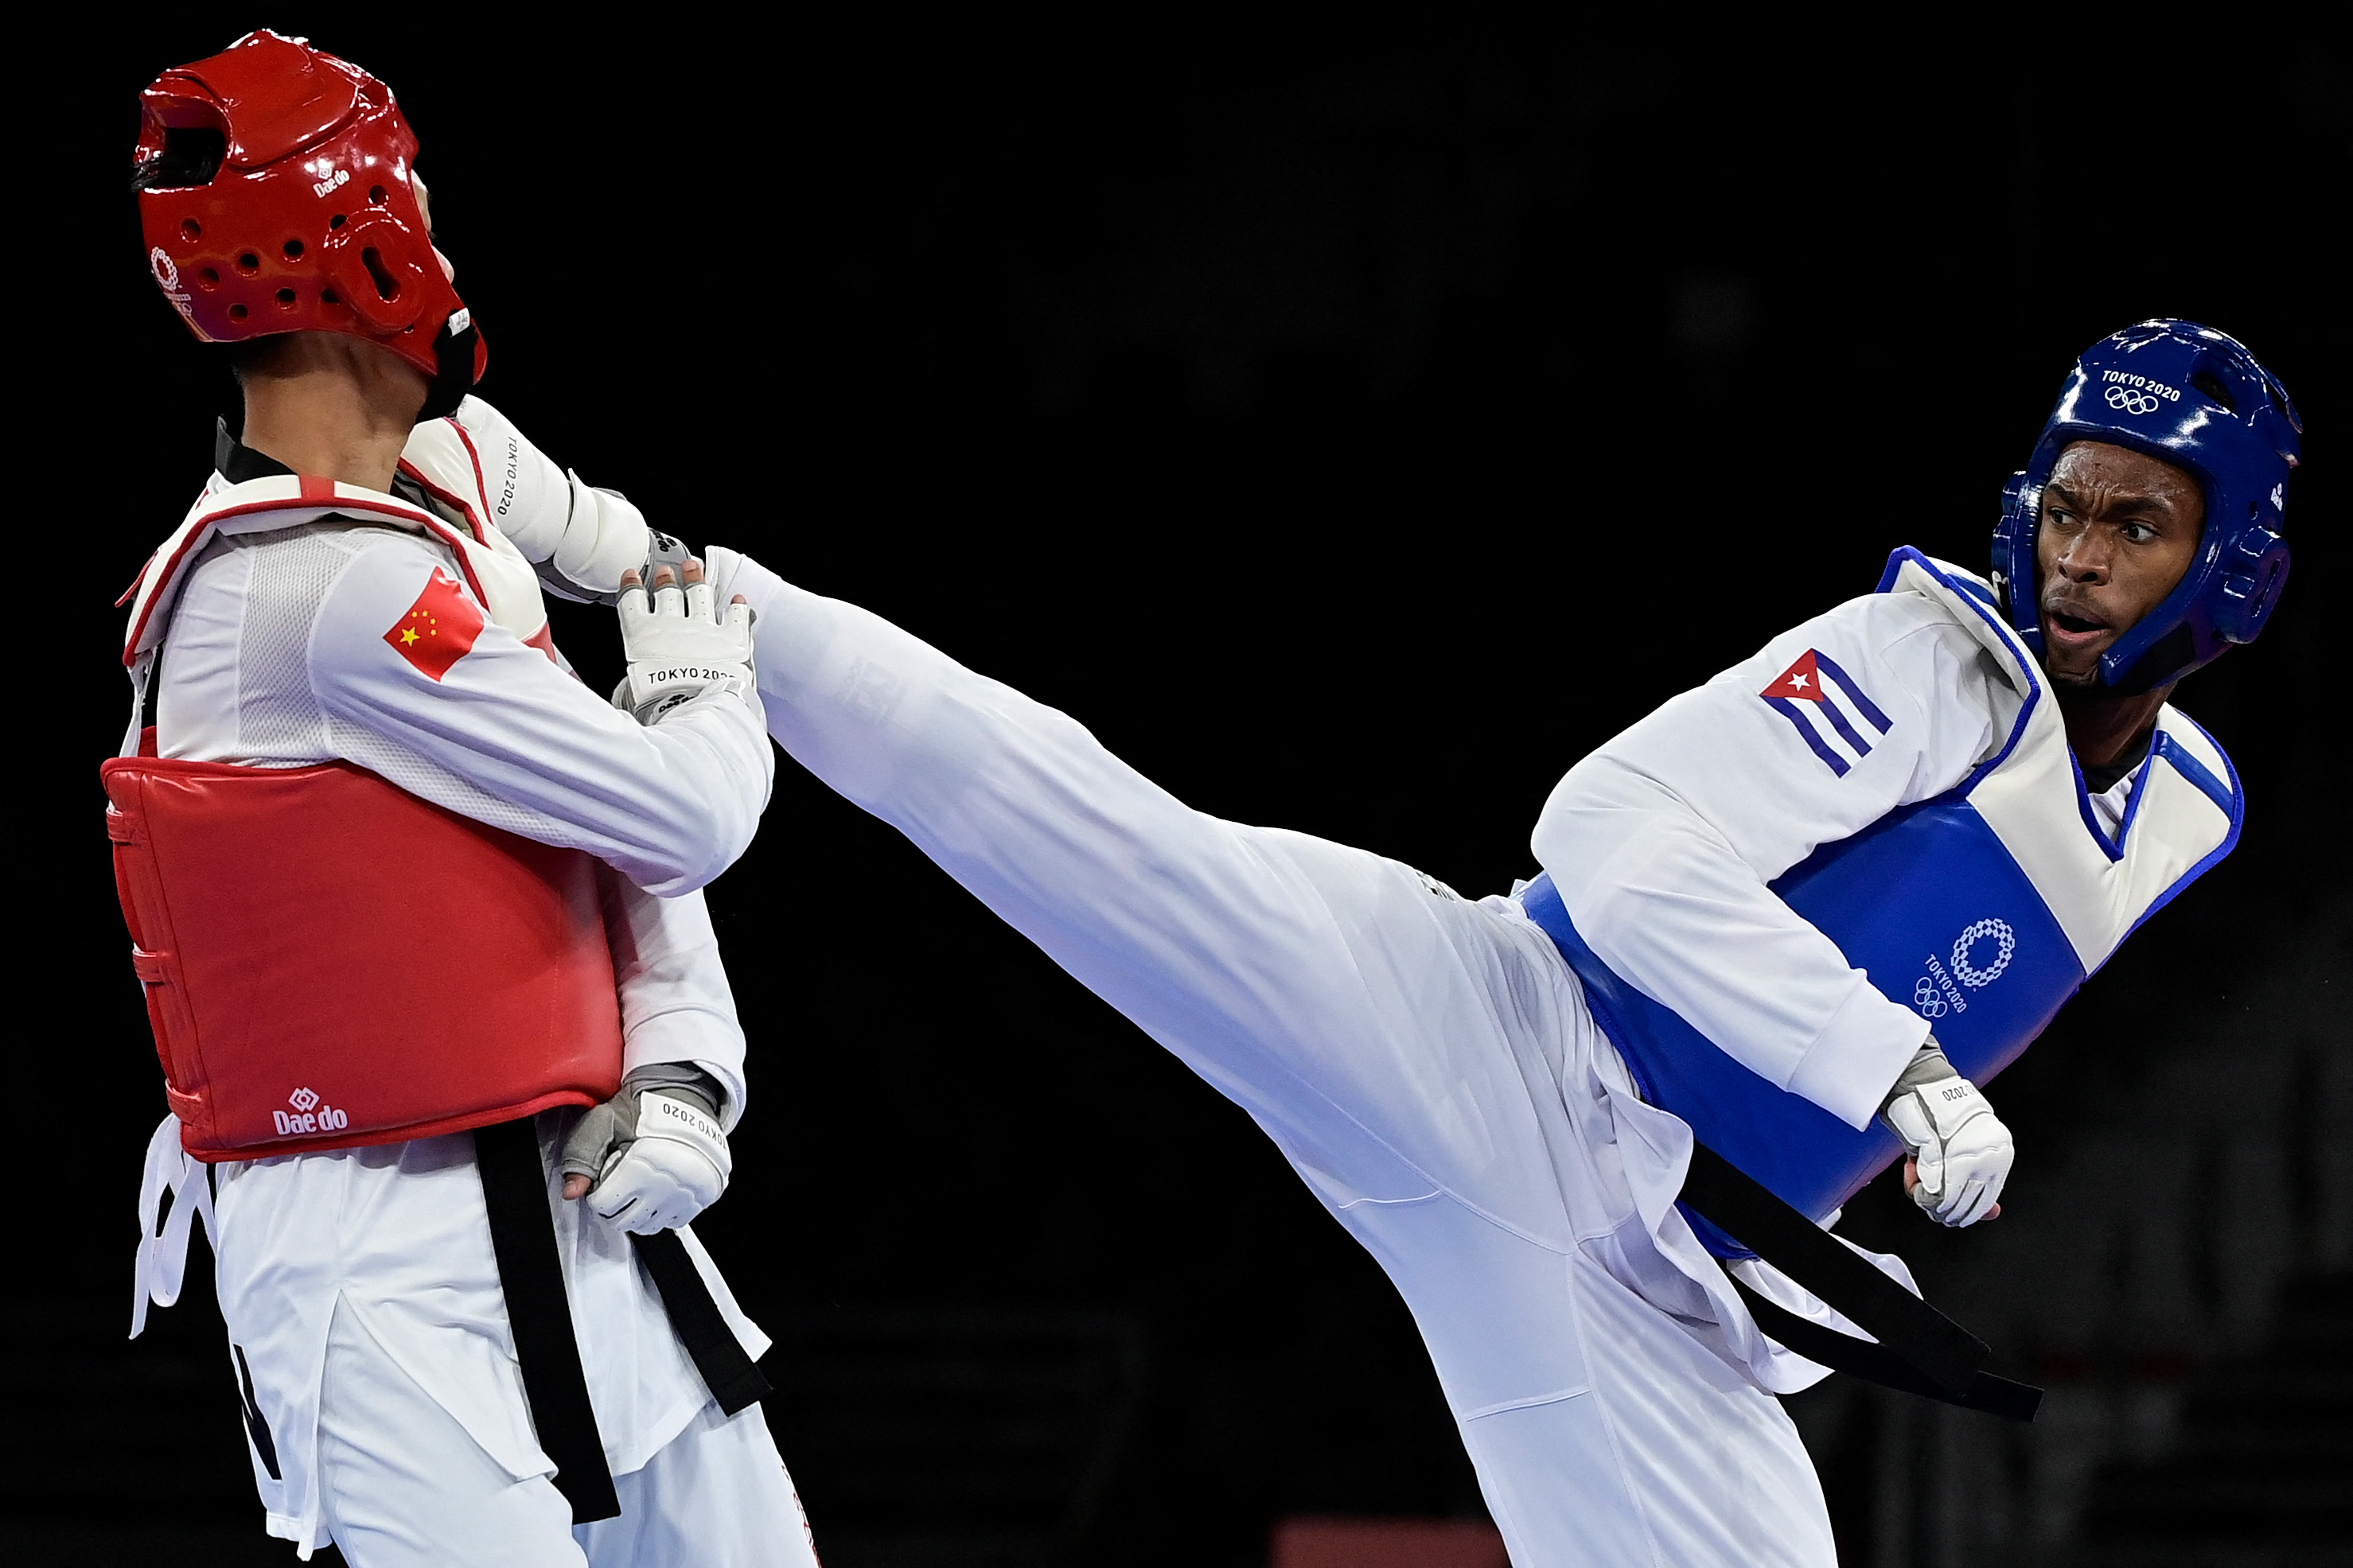 Cuba's Rafael Yunier Alba Castillo (Blue) and China's Sun Hongyi (Red) compete in the taekwondo men's +80kg bronze medal B bout during the Tokyo 2020 Olympic Games at the Makuhari Messe Hall in Tokyo on July 27, 2021. (Photo by Javier SORIANO / AFP)